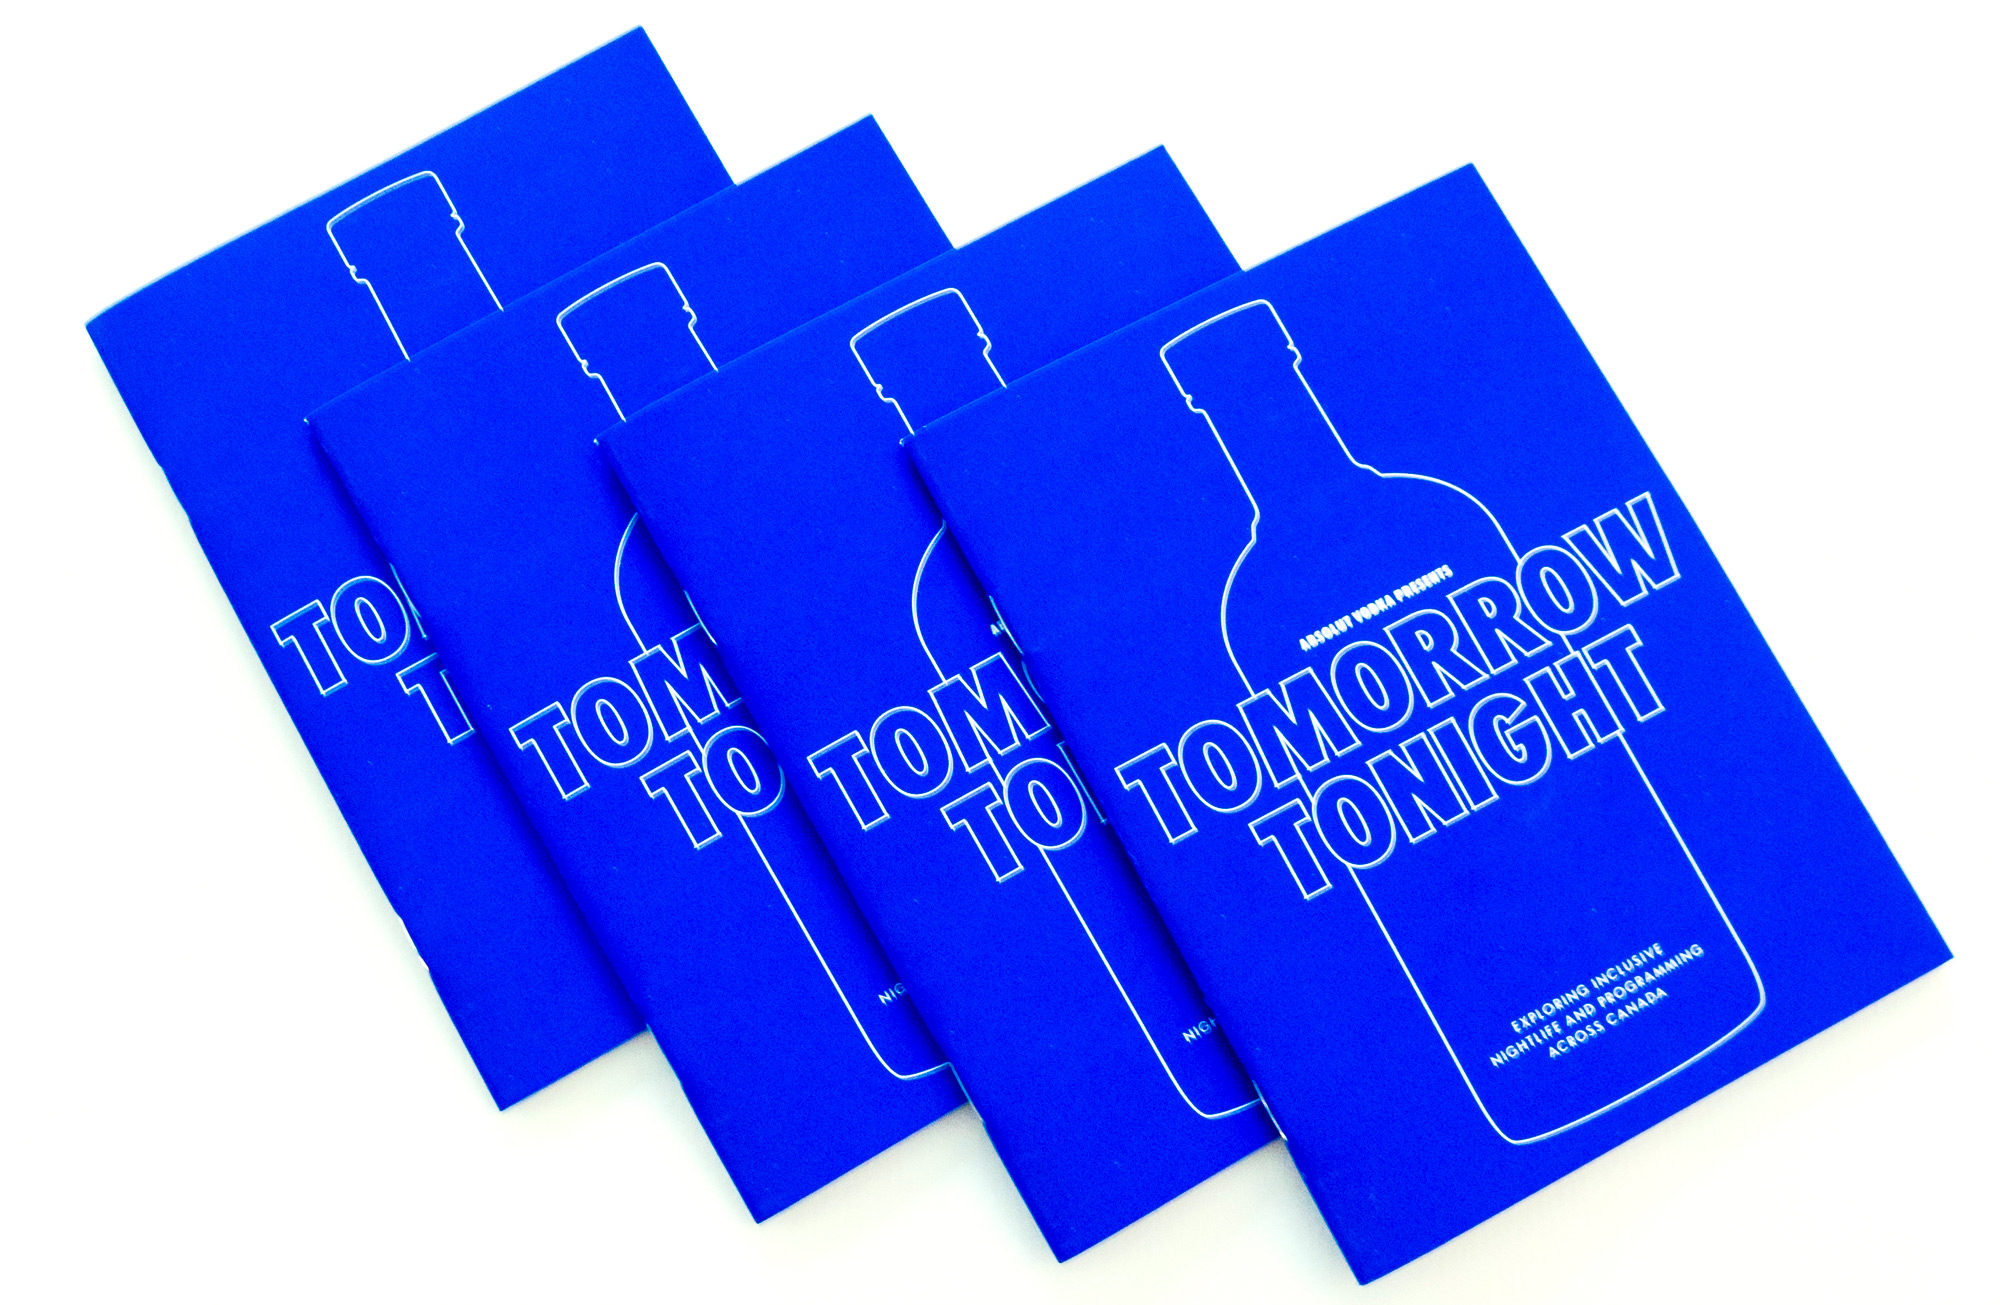 Absolut Tomorrow Tonight zine cover in bright blue